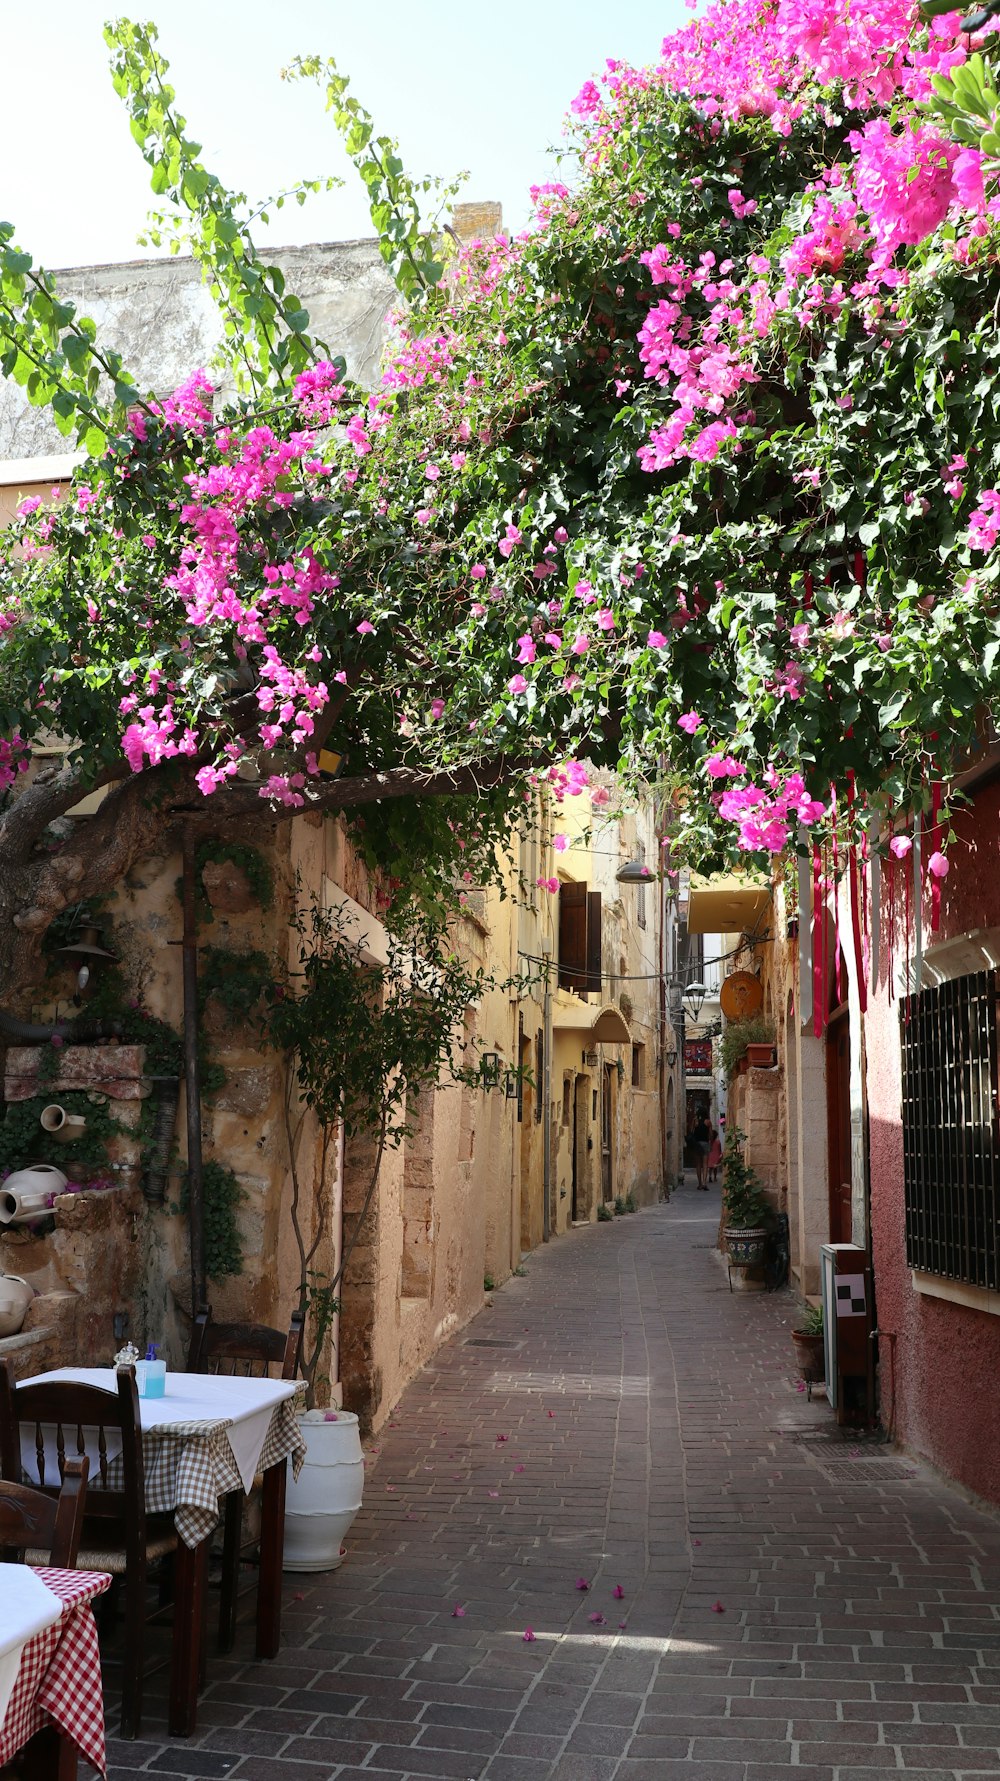 a narrow alley way with pink flowers on the trees